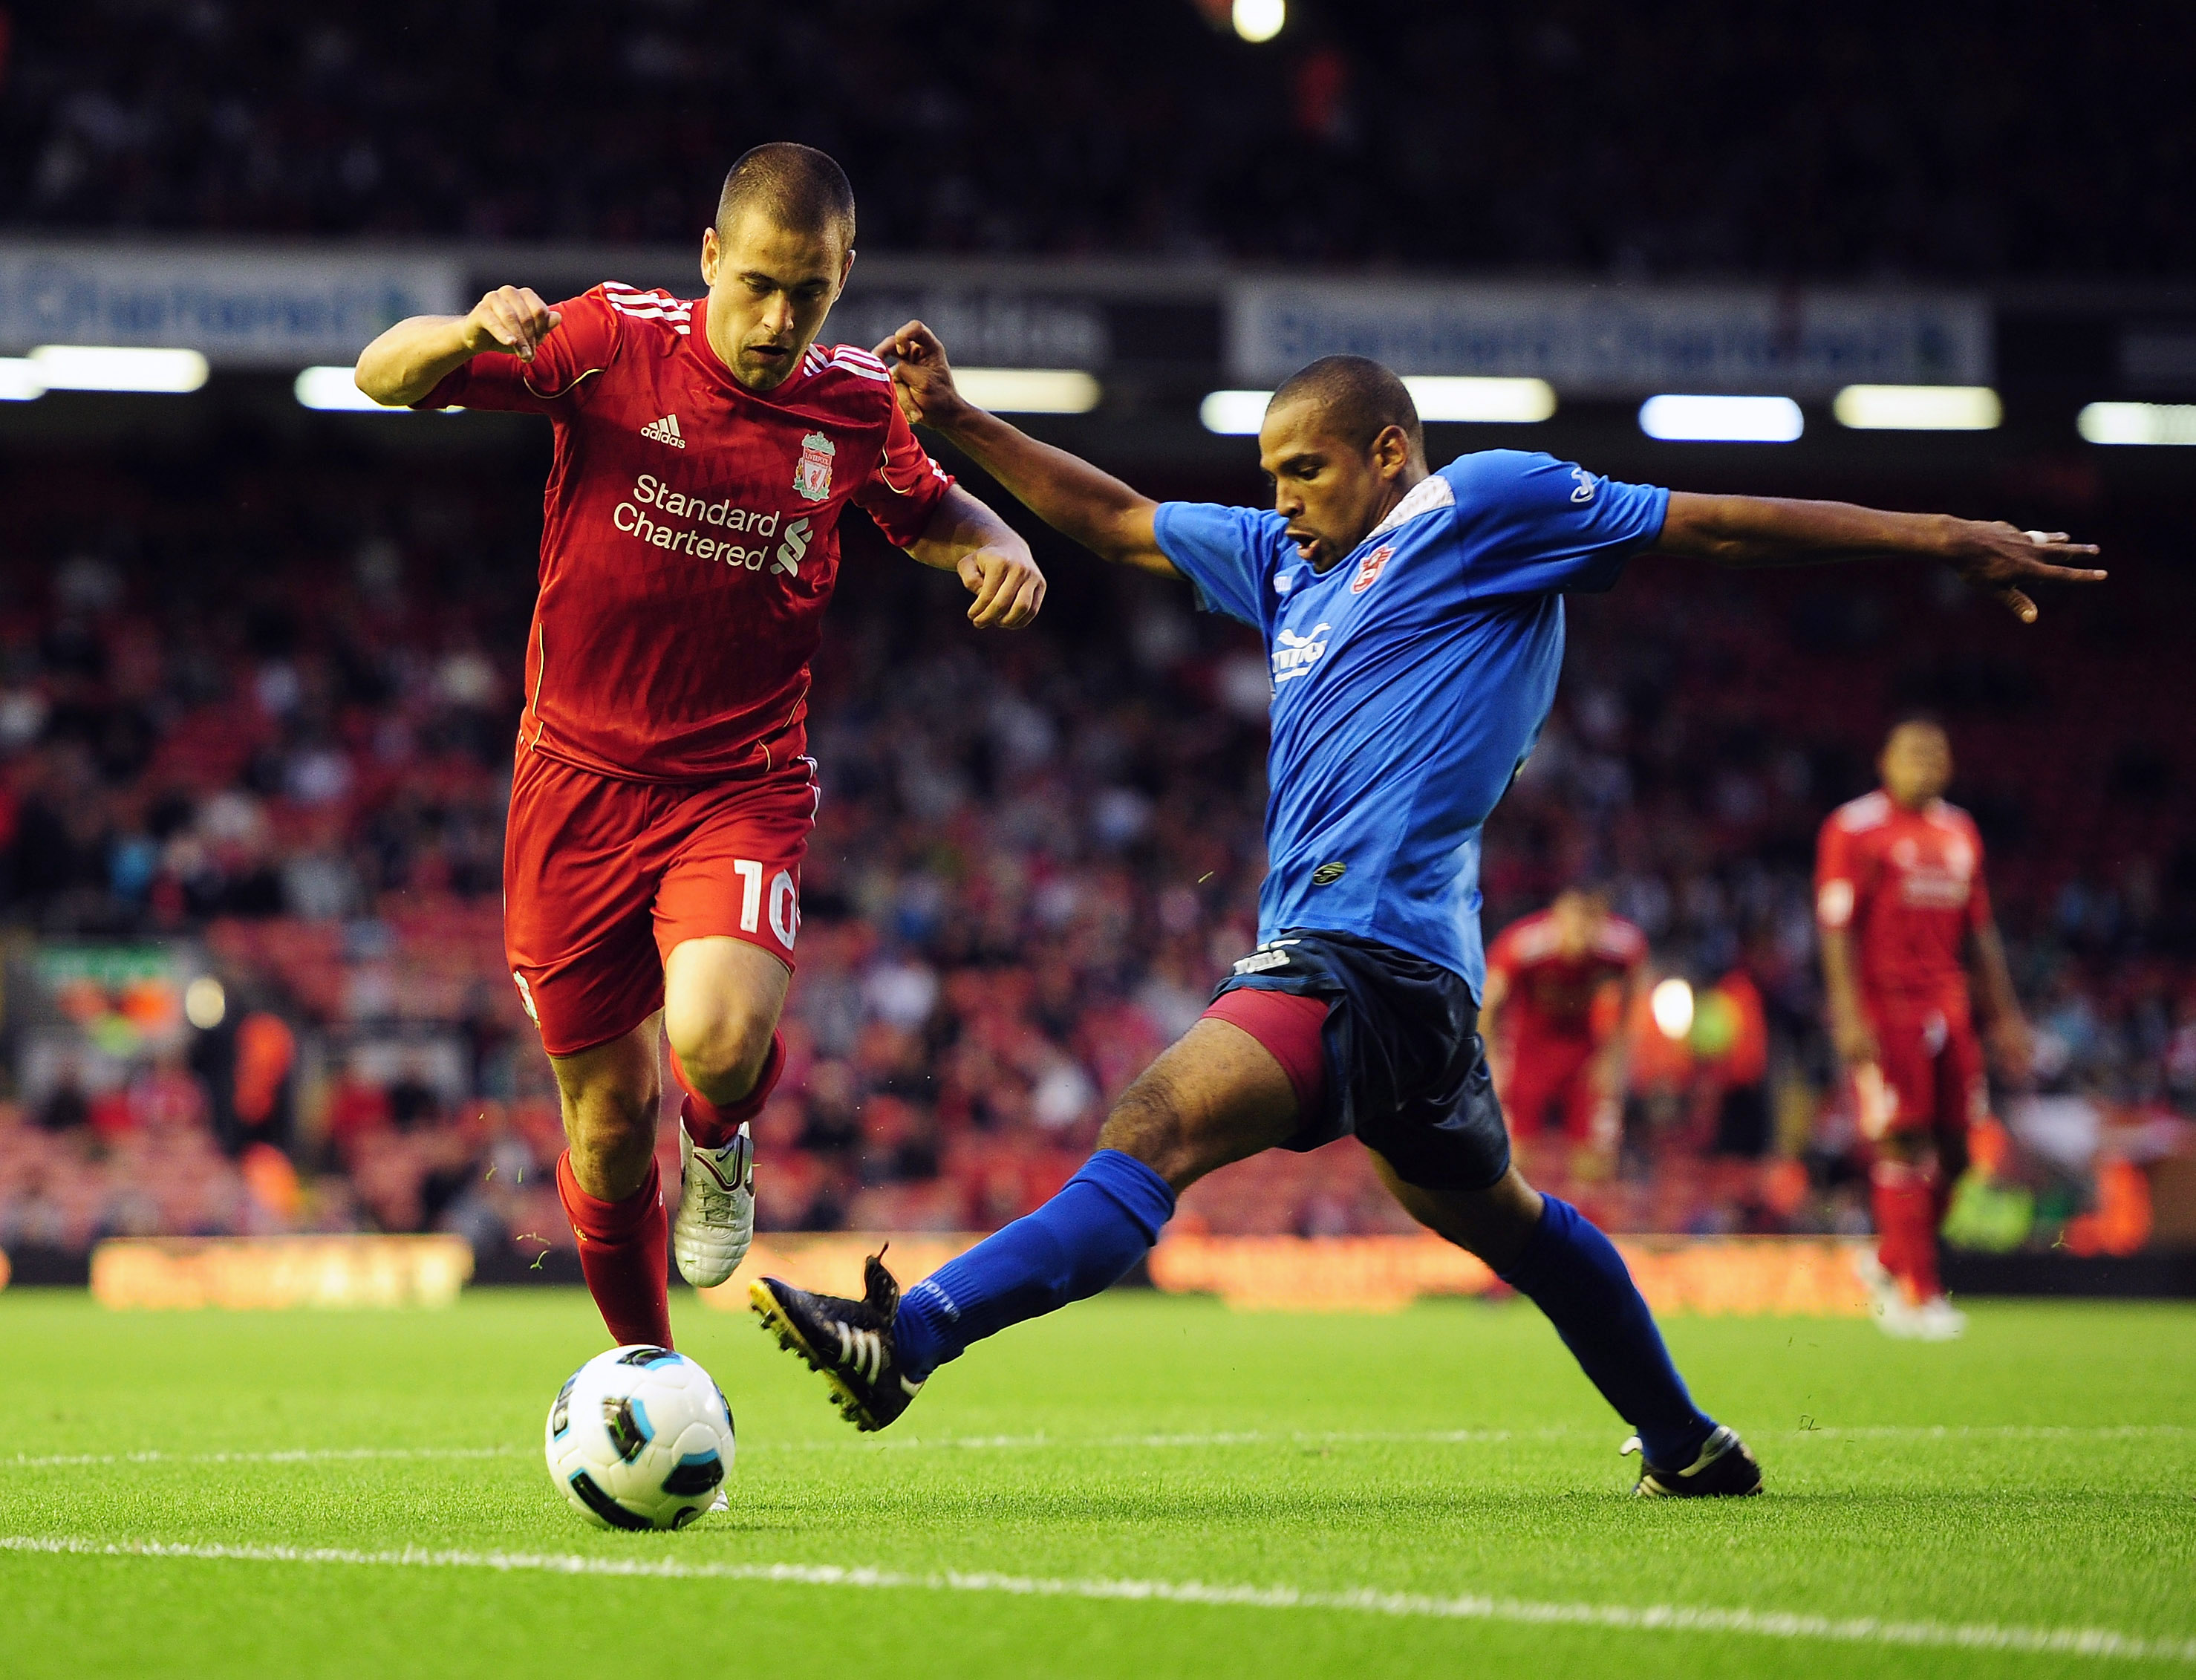 LIVERPOOL, ENGLAND - AUGUST 05:  Joe Cole of Liverpool in action during the Europa League, Third Qualifying Round, Second Leg match between Liverpool and FK Rabotnicki at Anfield on August 5, 2010 in Liverpool, England.  (Photo by Clive Mason/Getty Images